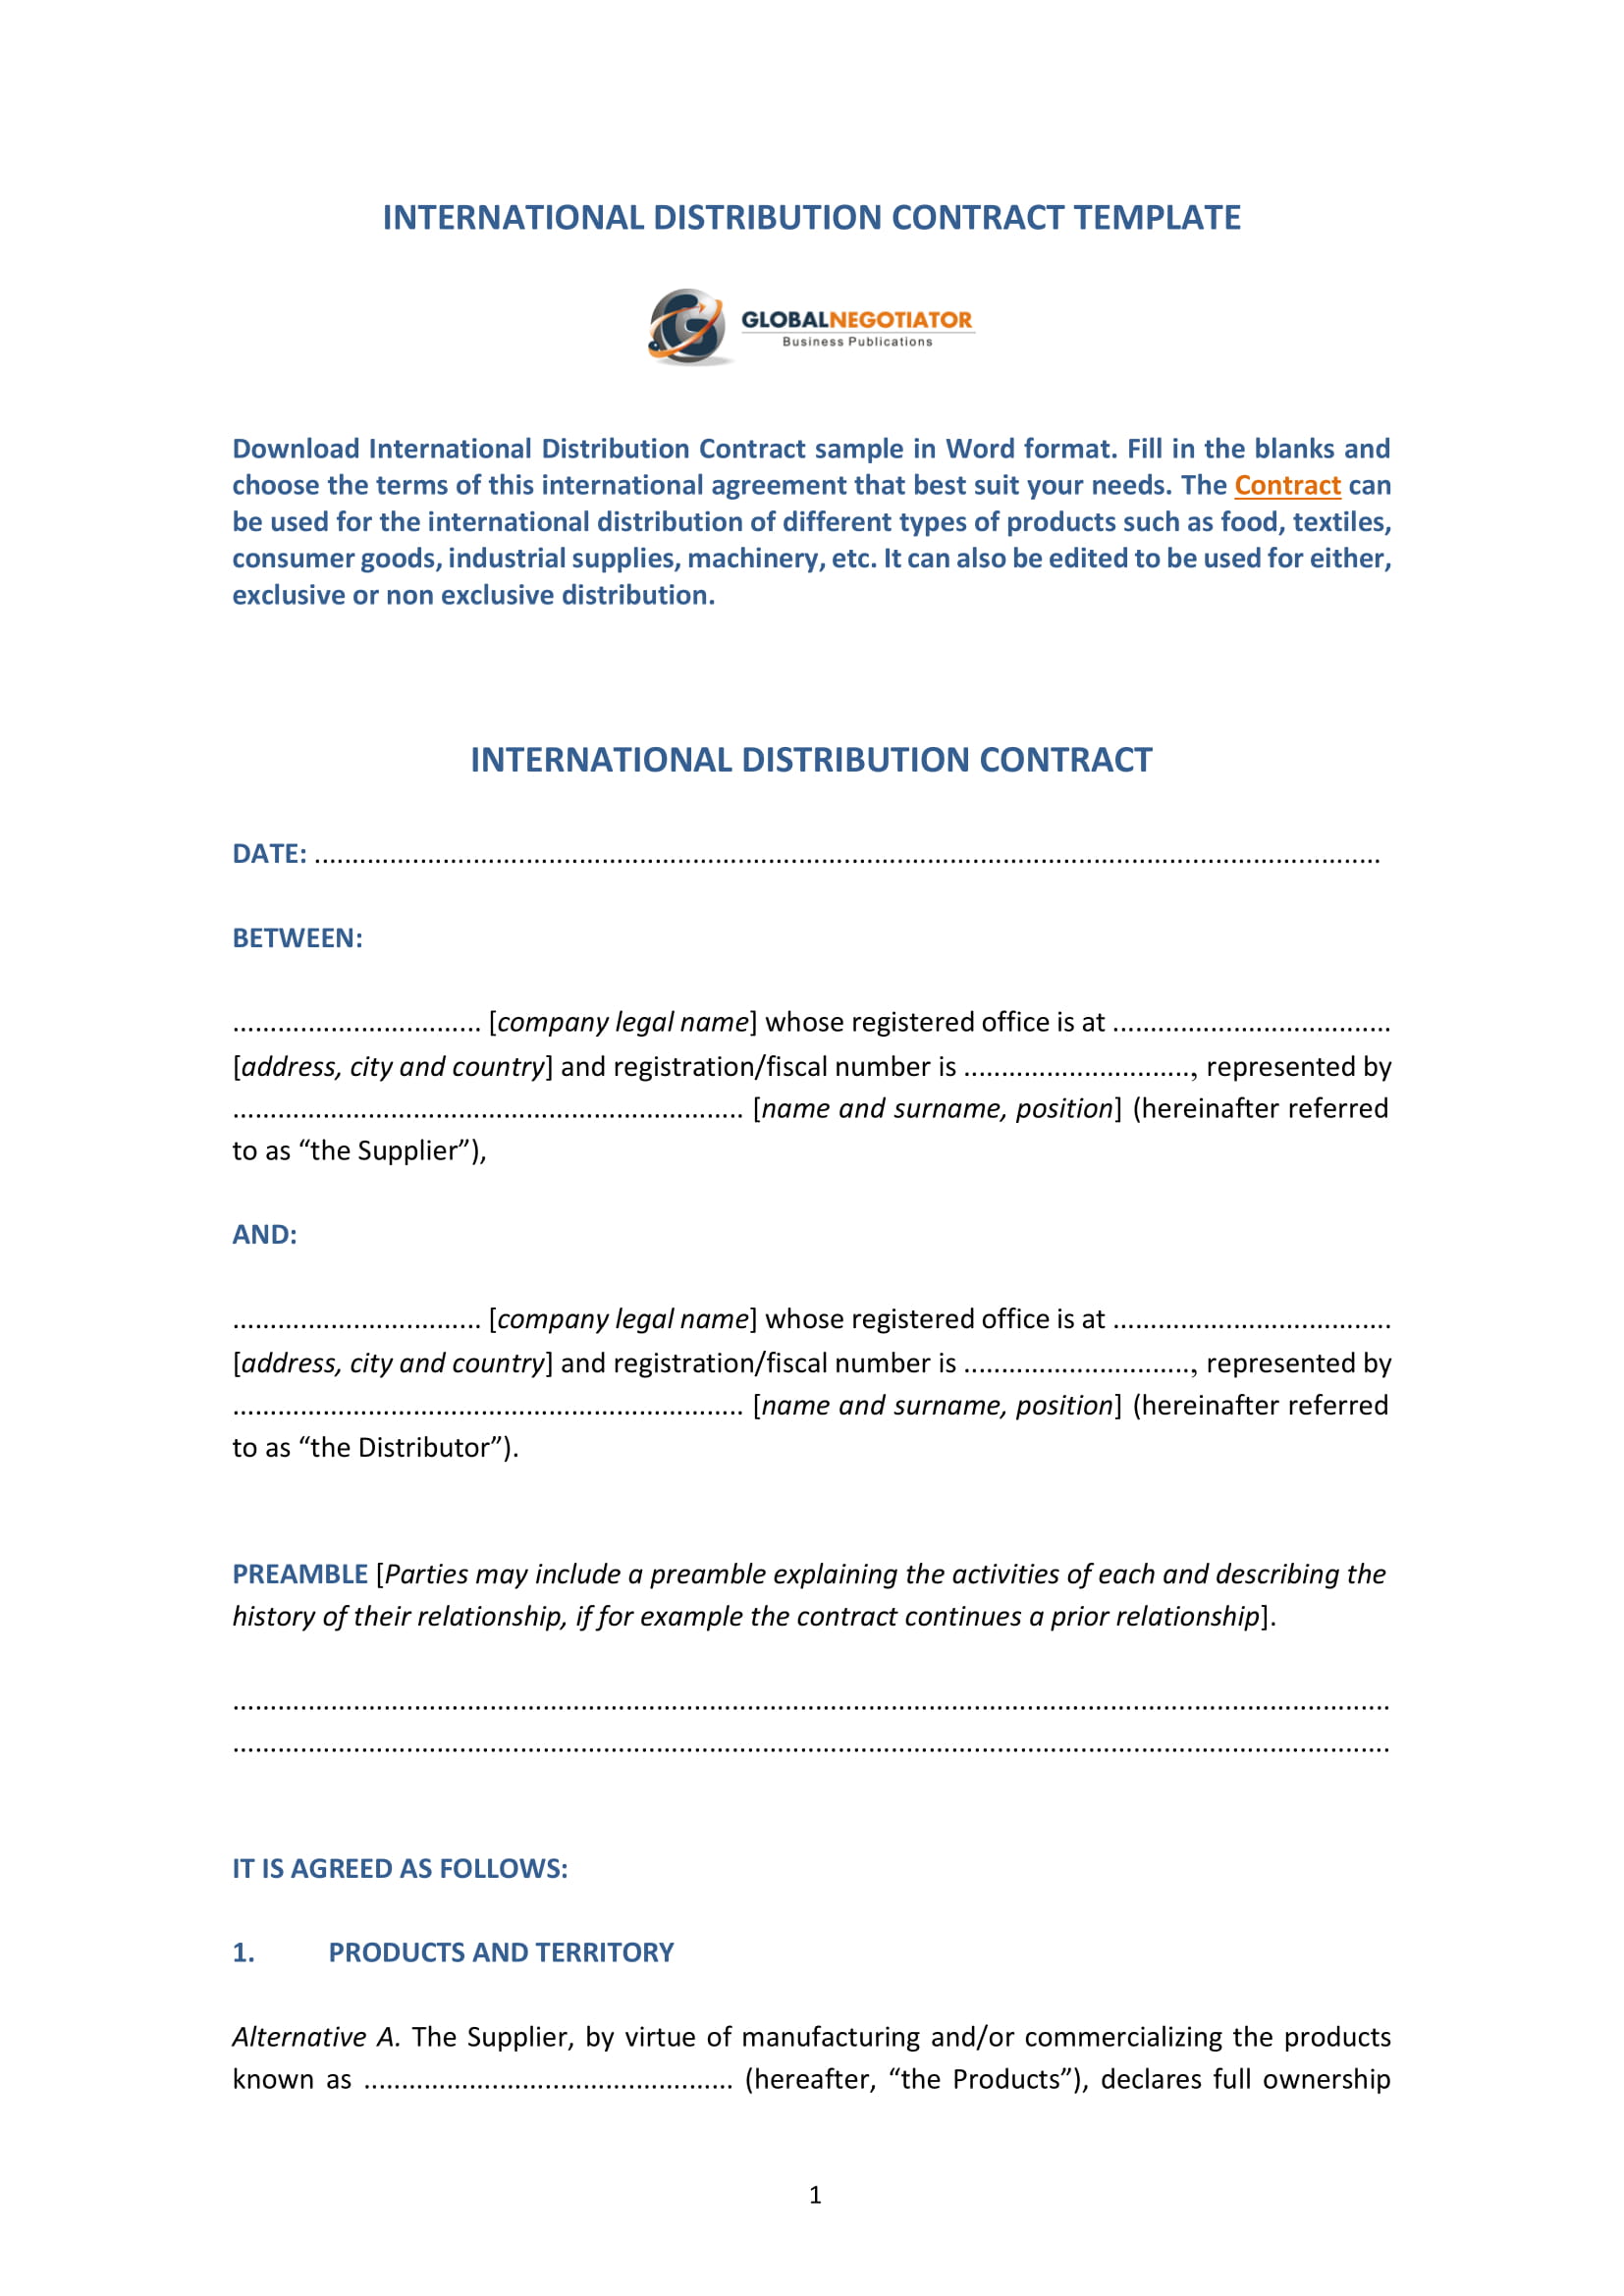 international distribution contract template 1